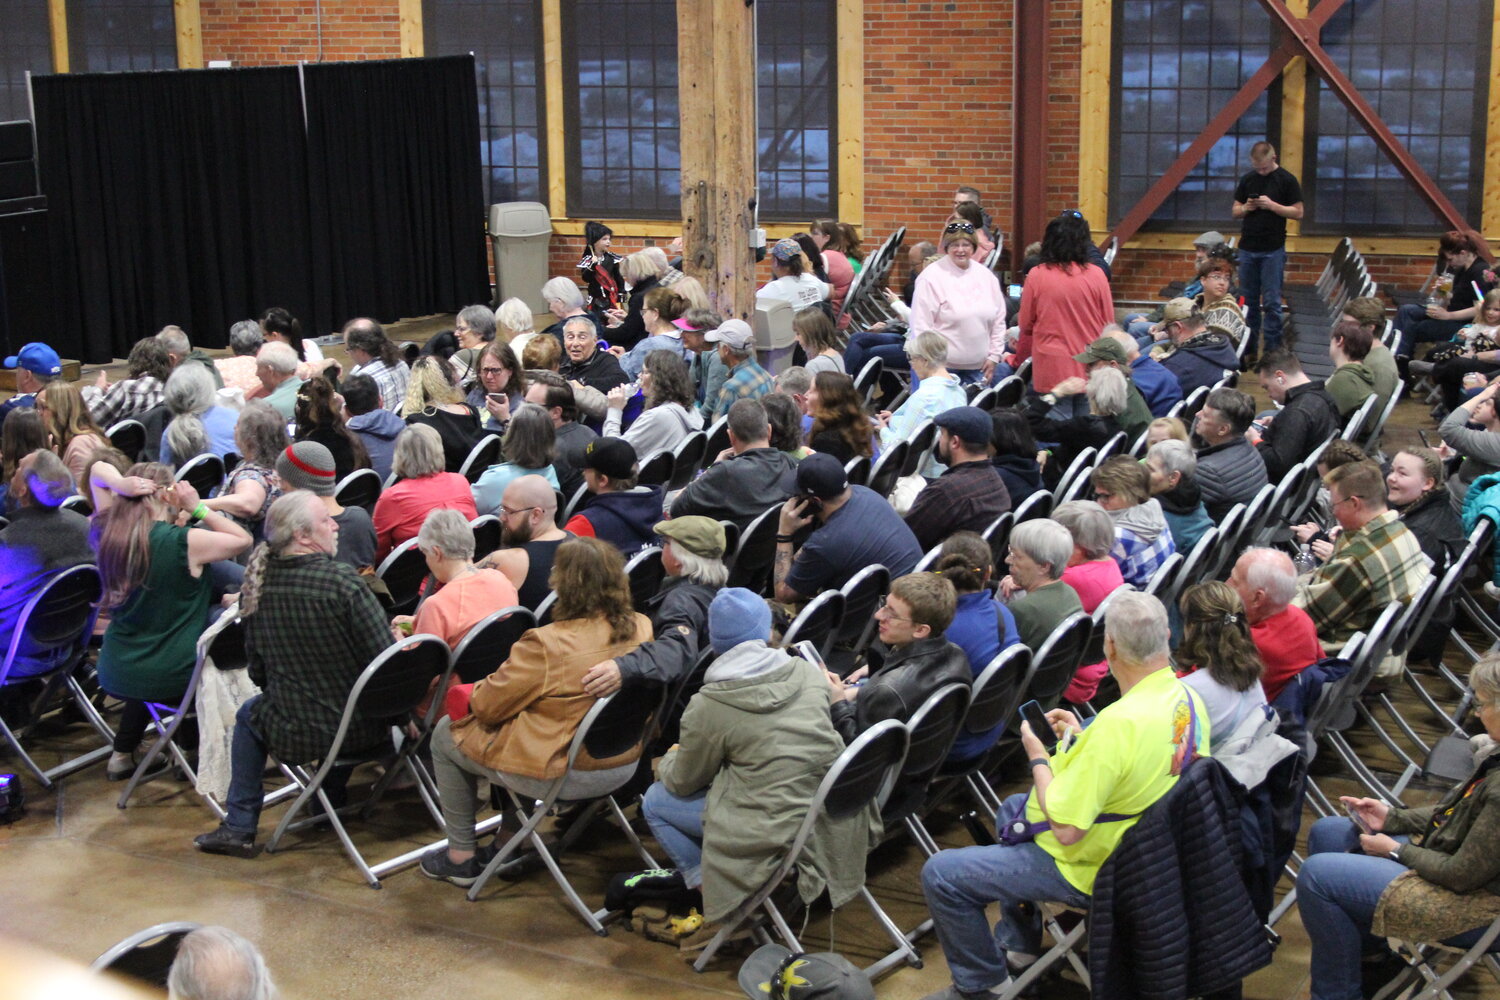 A large crowd awaits the headlining band at the Roundhouse during this year’s Celtic Festival.